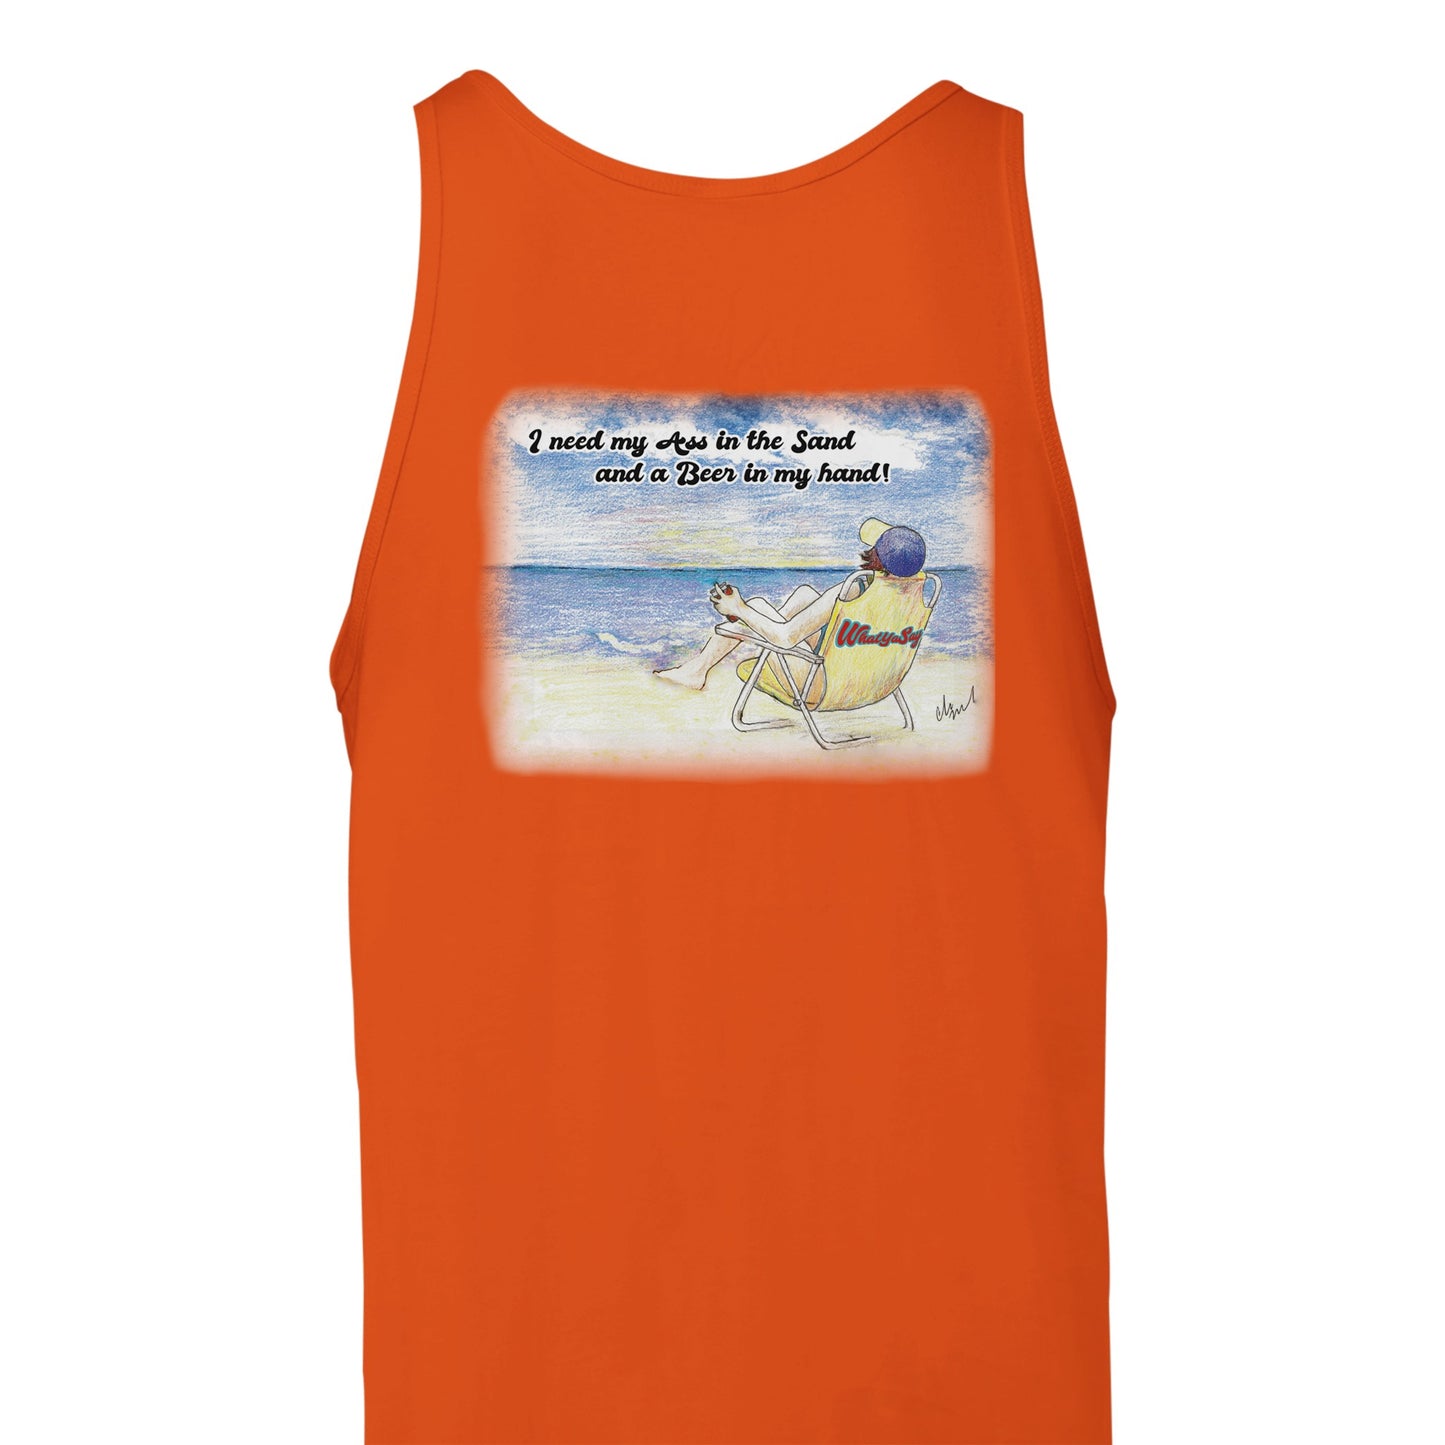 A orange Premium Unisex Tank Top with original artwork and motto I need my Ass in the Sand and a Beer in my hand on back and WhatYa Say logo on front from combed and ring-spun cotton back view from WhatYa Say Apparel.